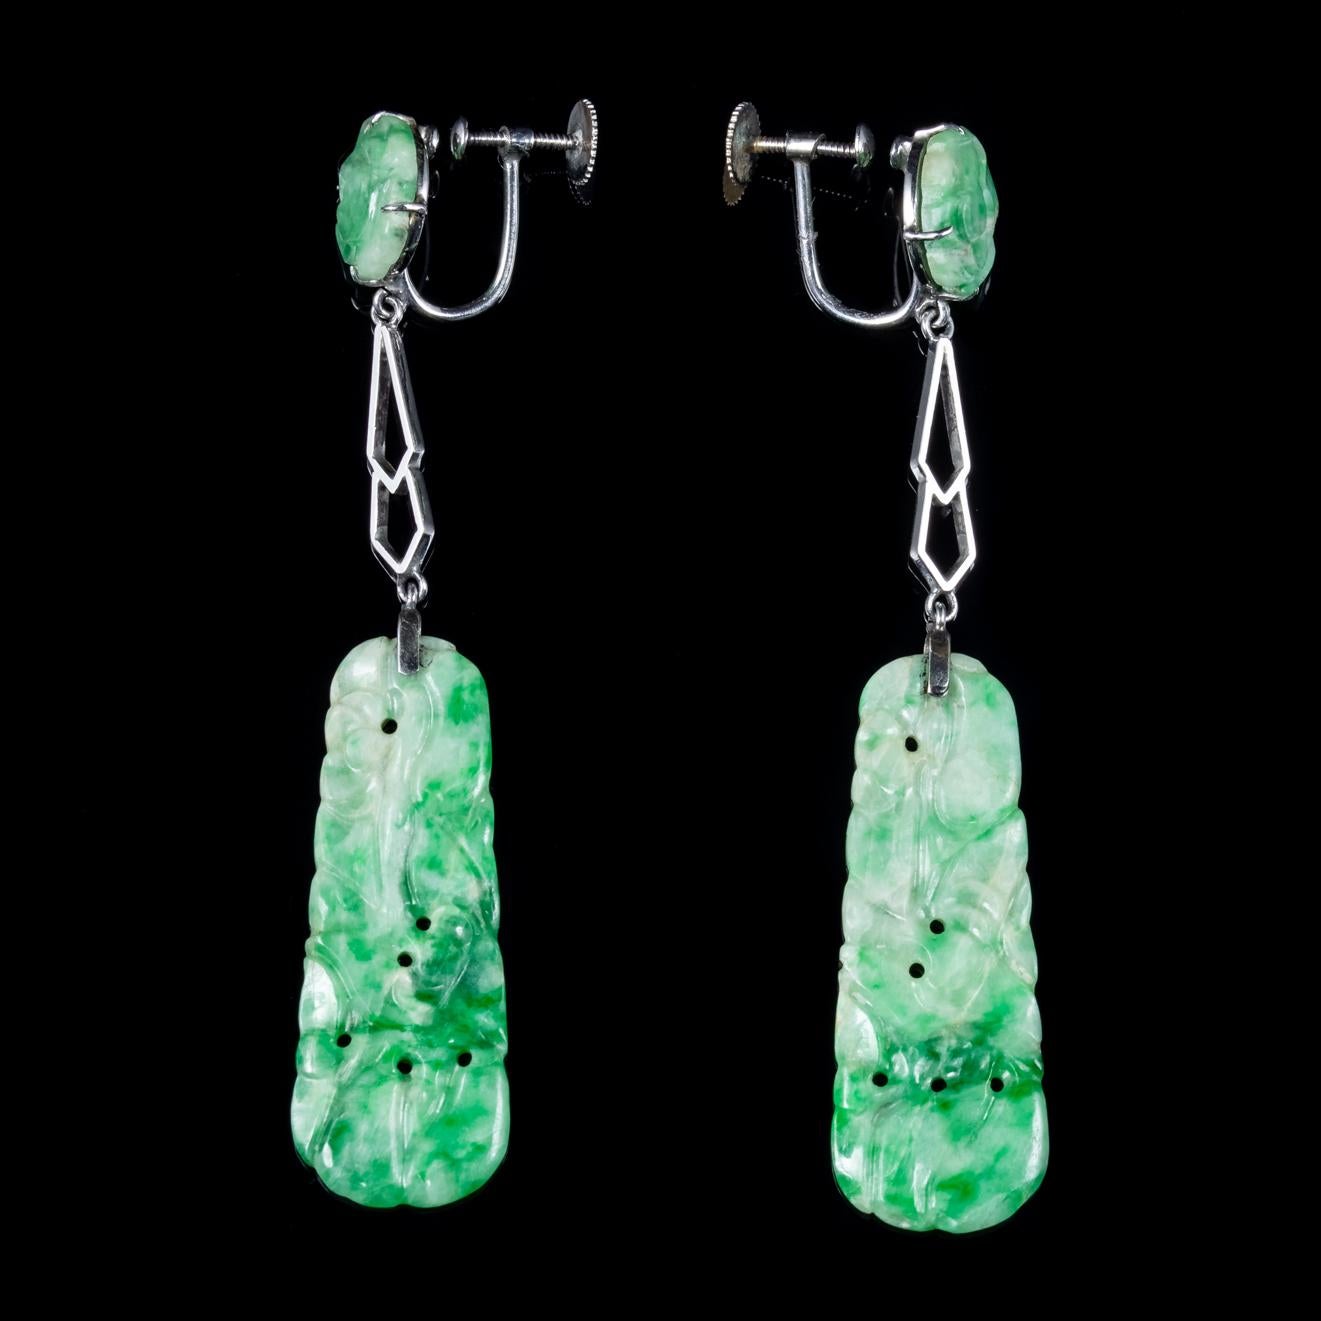 A spectacular pair of Art Deco drop earrings featuring beautiful carved Jade stones the largest of which dangles from a long gallery and displays beautiful engraved patterning. 

Jade is considered the ultimate ‘Dream Stone’ and has been admired in